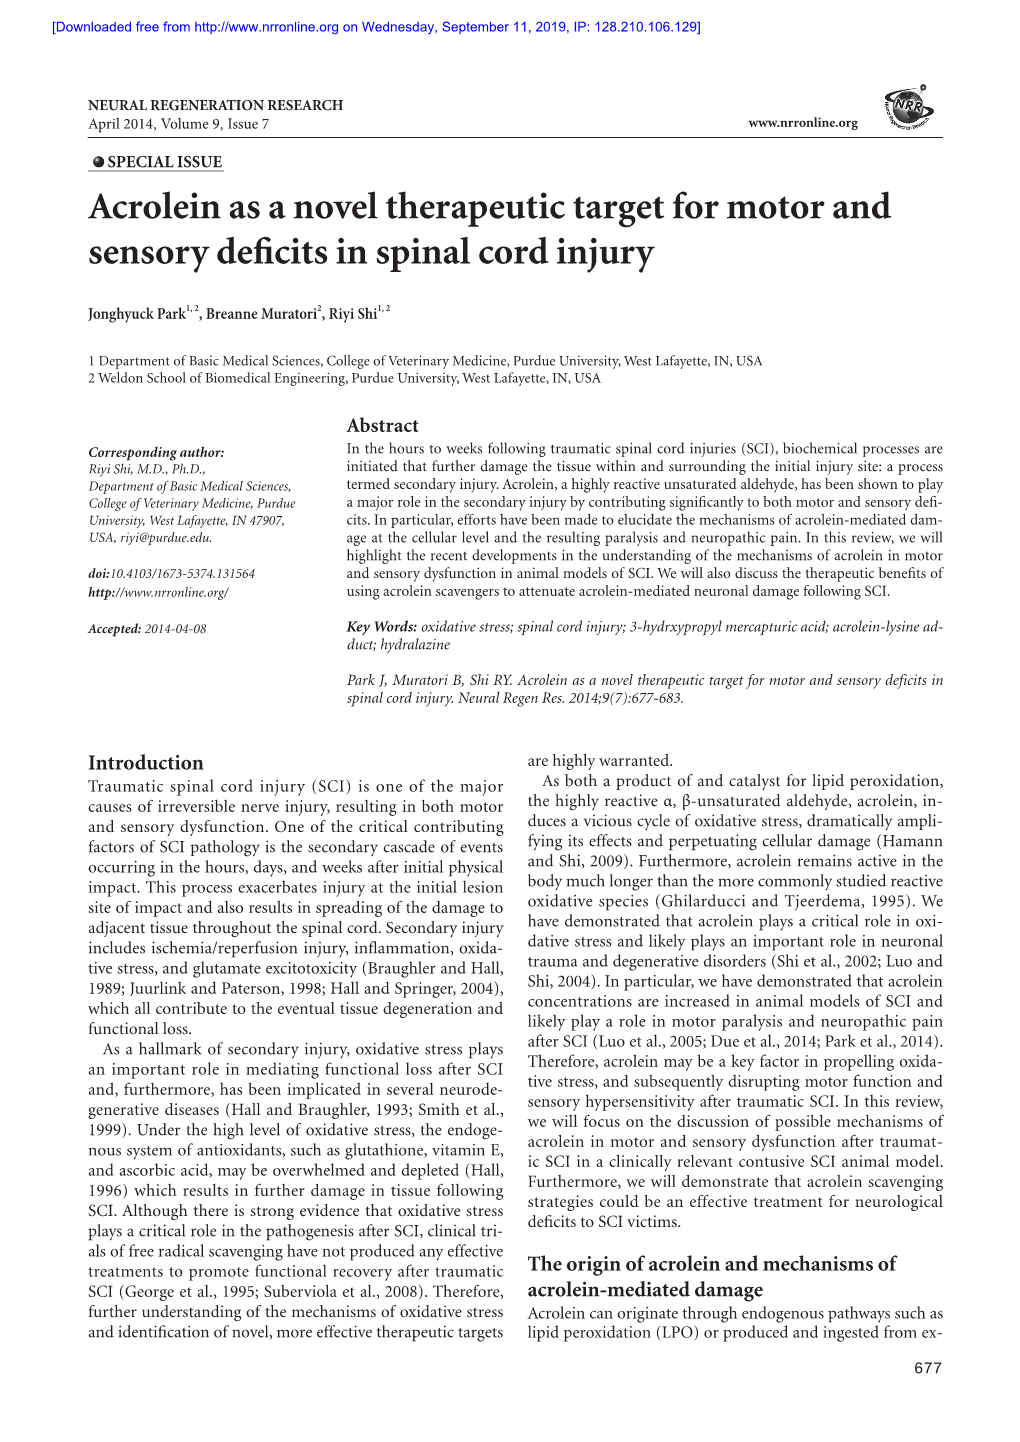 Acrolein As a Novel Therapeutic Target for Motor and Sensory Deficits in Spinal Cord Injury